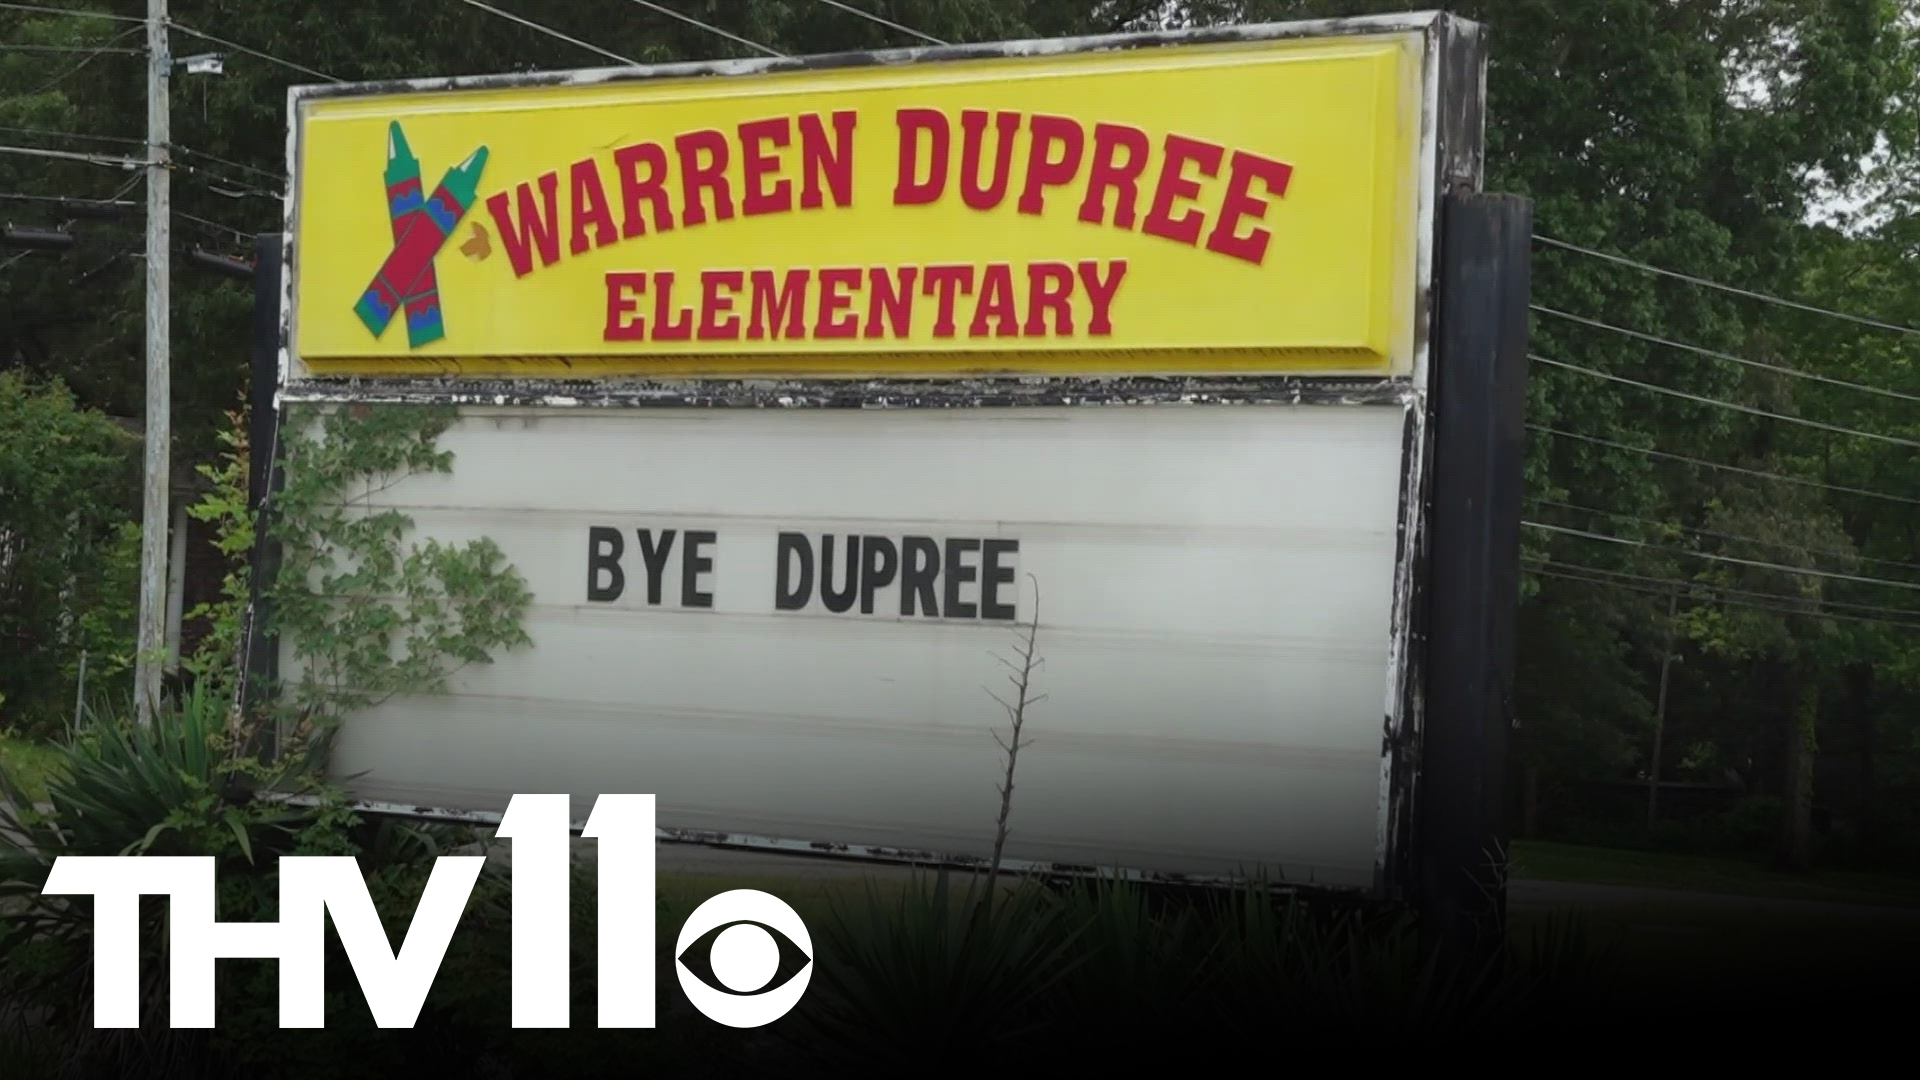 Some Jacksonville residents gathered to say their final goodbyes to Warren Dupree Elementary, which will be demolished this summer.